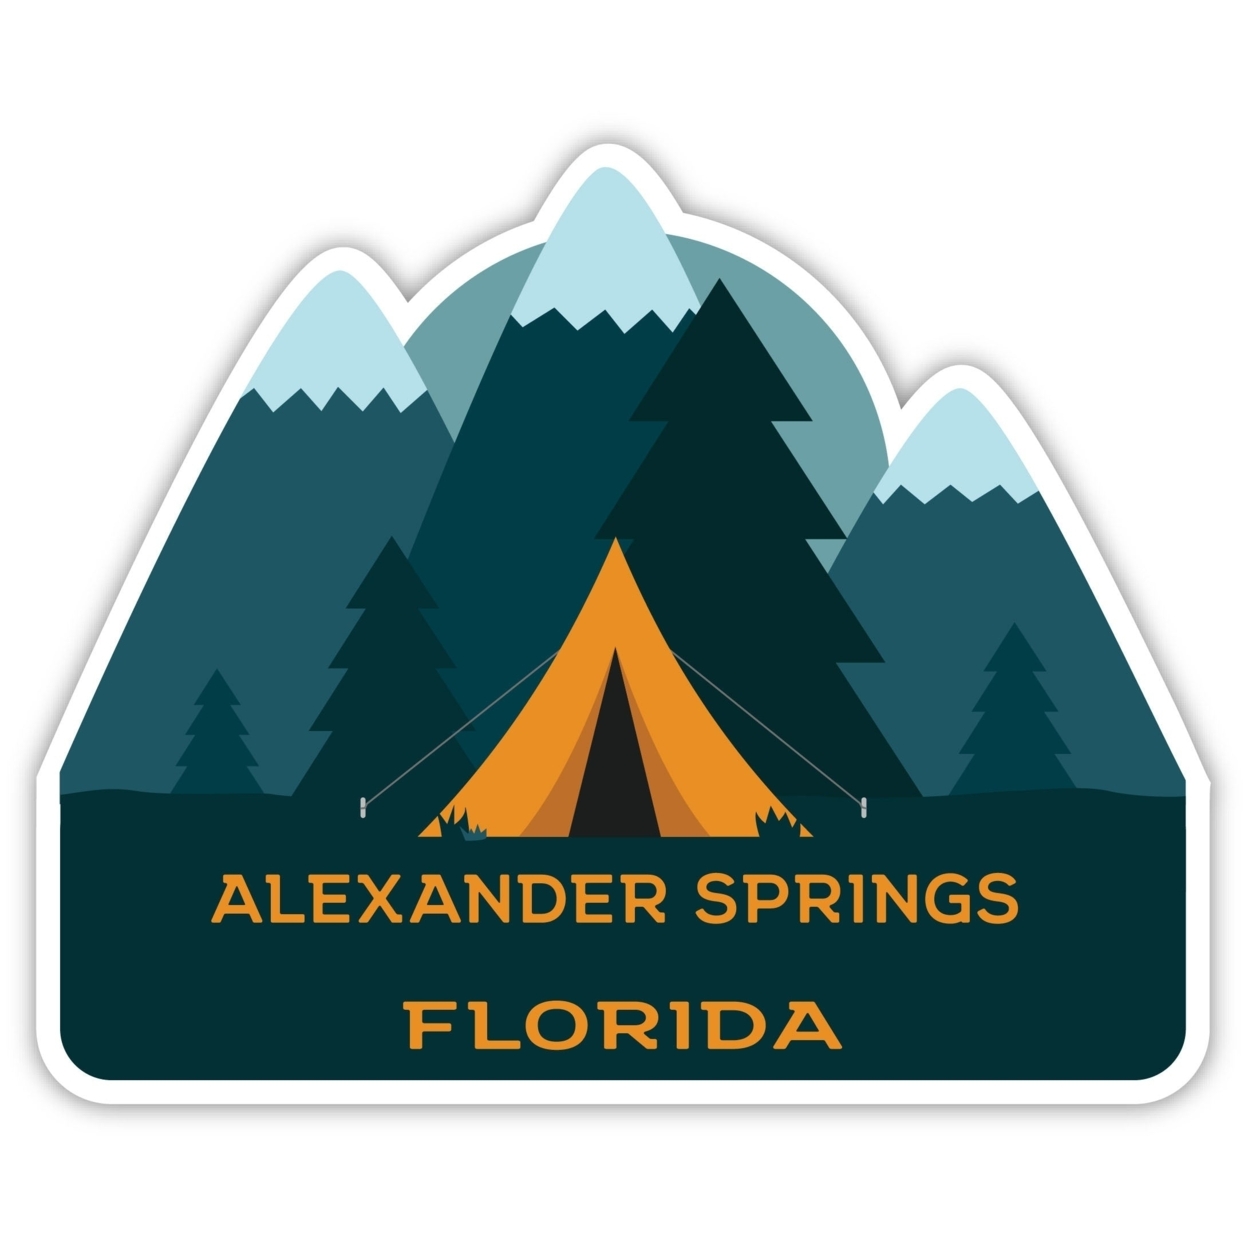 Alexander Springs Florida Souvenir Decorative Stickers (Choose Theme And Size) - 4-Pack, 8-Inch, Bear